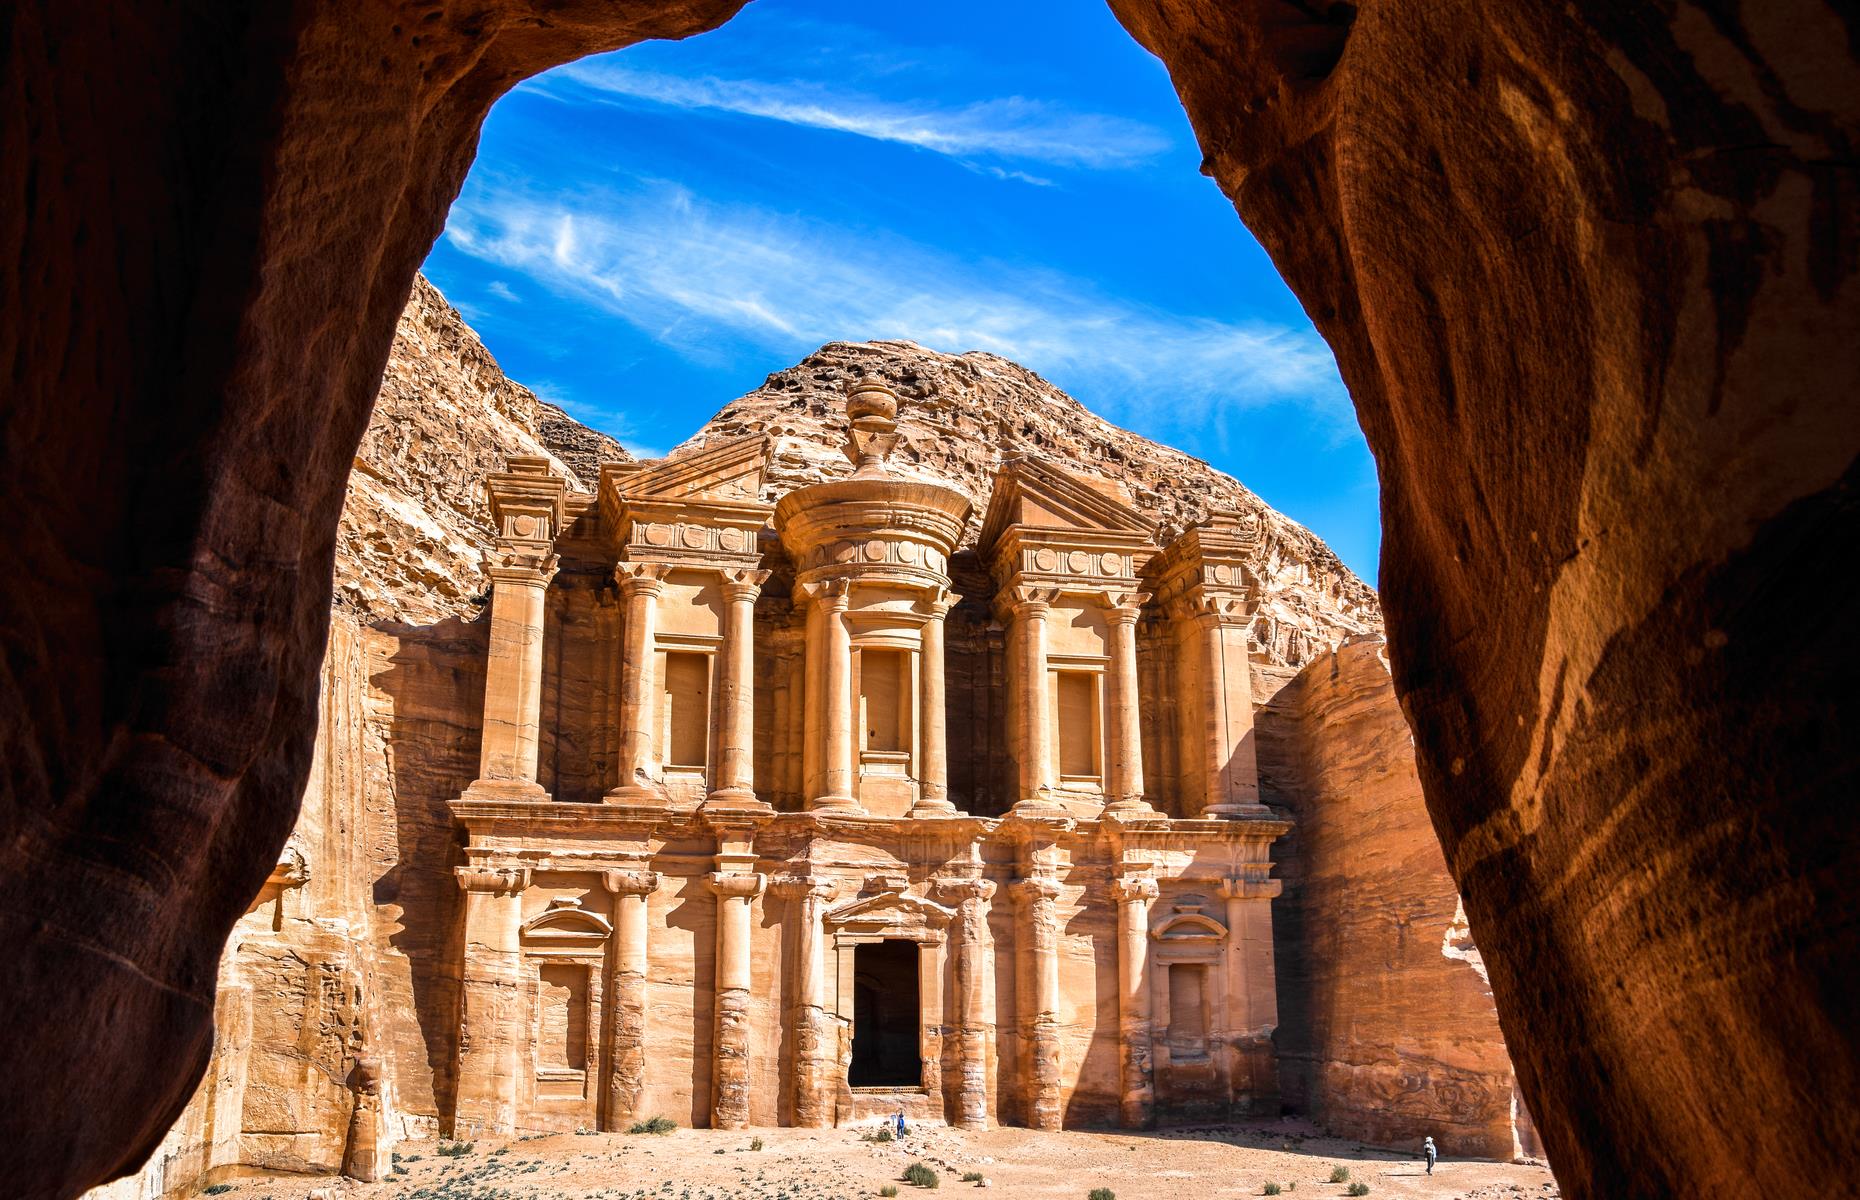 <p>The desert kingdom of Petra is Jordan’s prize treasure and a wonder of the world. Carved into a sheer rock face more than 2,000 years ago by the Nabataeans (a nomadic tribe who eventually settled), it became the capital of their wealthy trade empire with the east and west. The Siq, Treasury, the Colonnaded Street, the High Place of Sacrifice, the Royal Tombs and the Roman theater are a few highlights of the vast site. When the Nabataean civilization declined it was taken over by the Romans.</p>